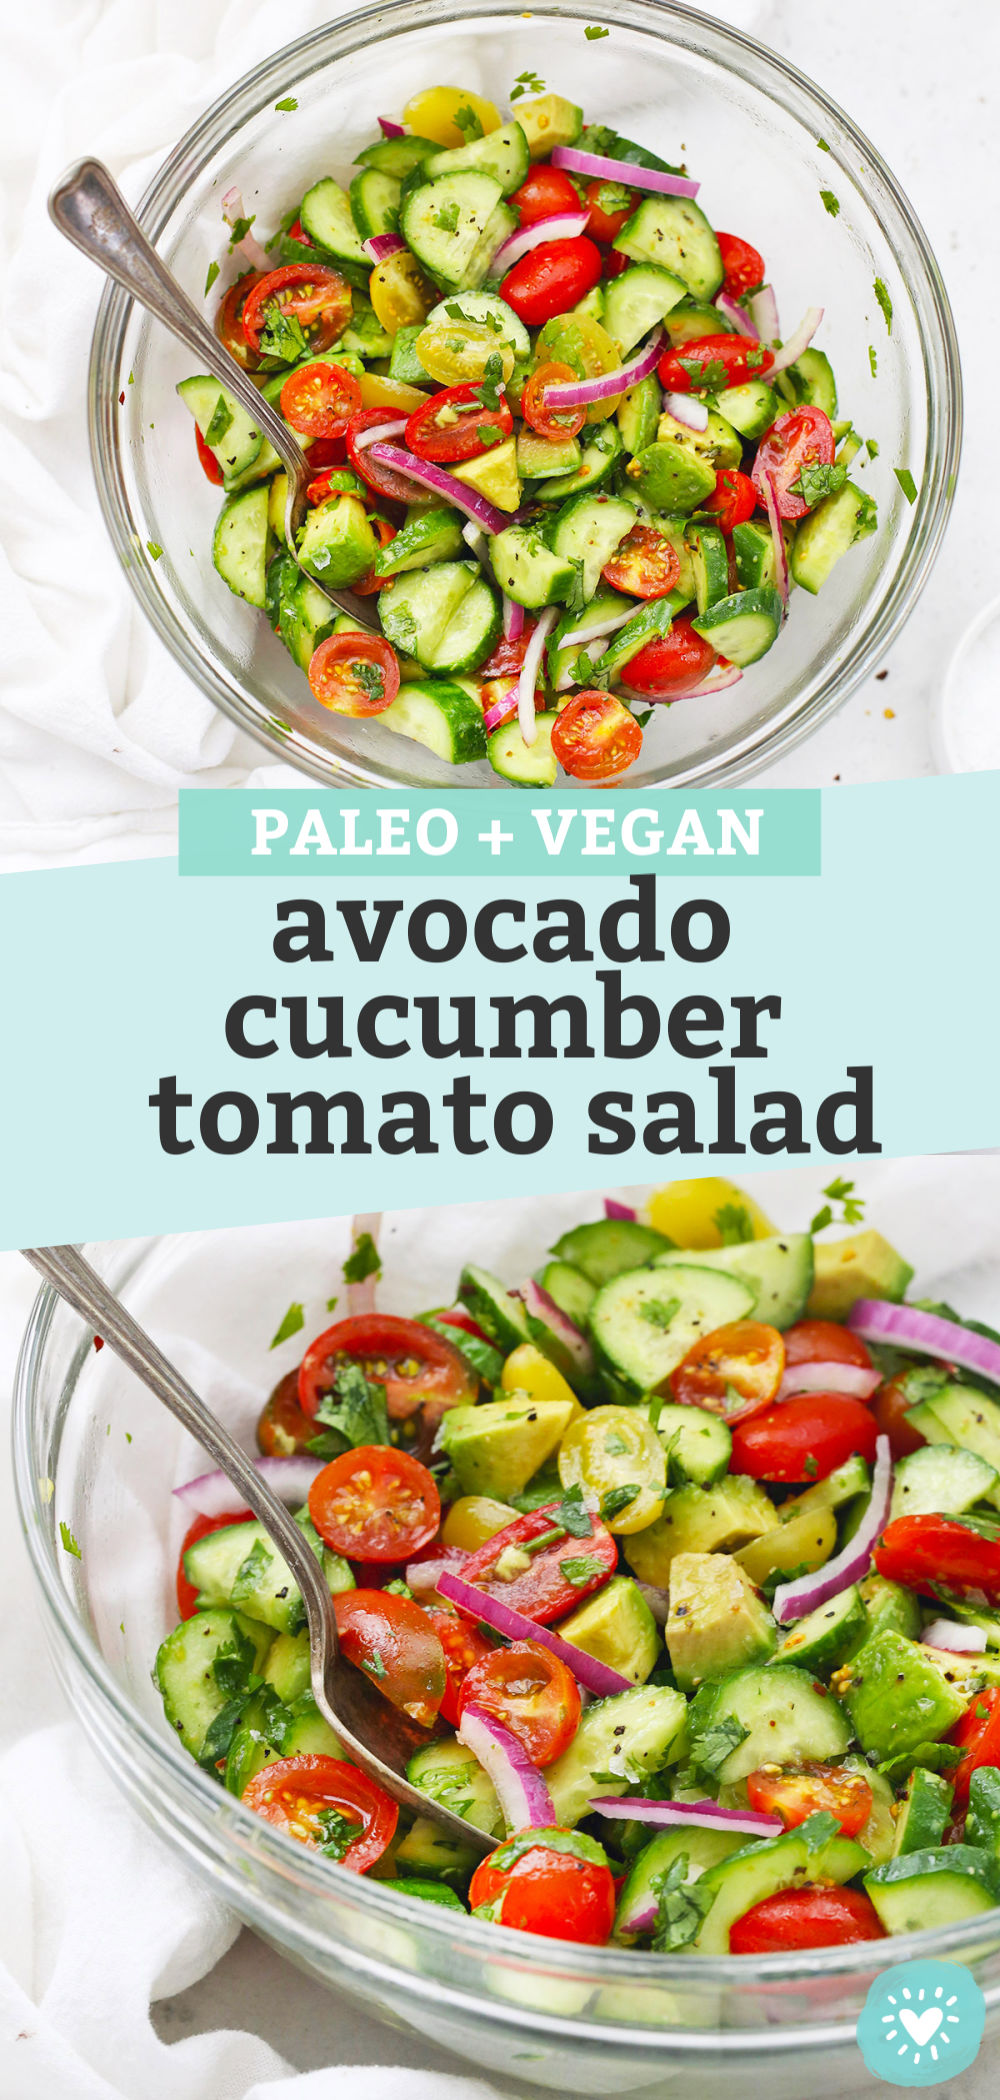 Collage of images of avocado cucumber tomato salad with text overlay that reads "Vegan + Paleo avocado cucumber tomato salad."